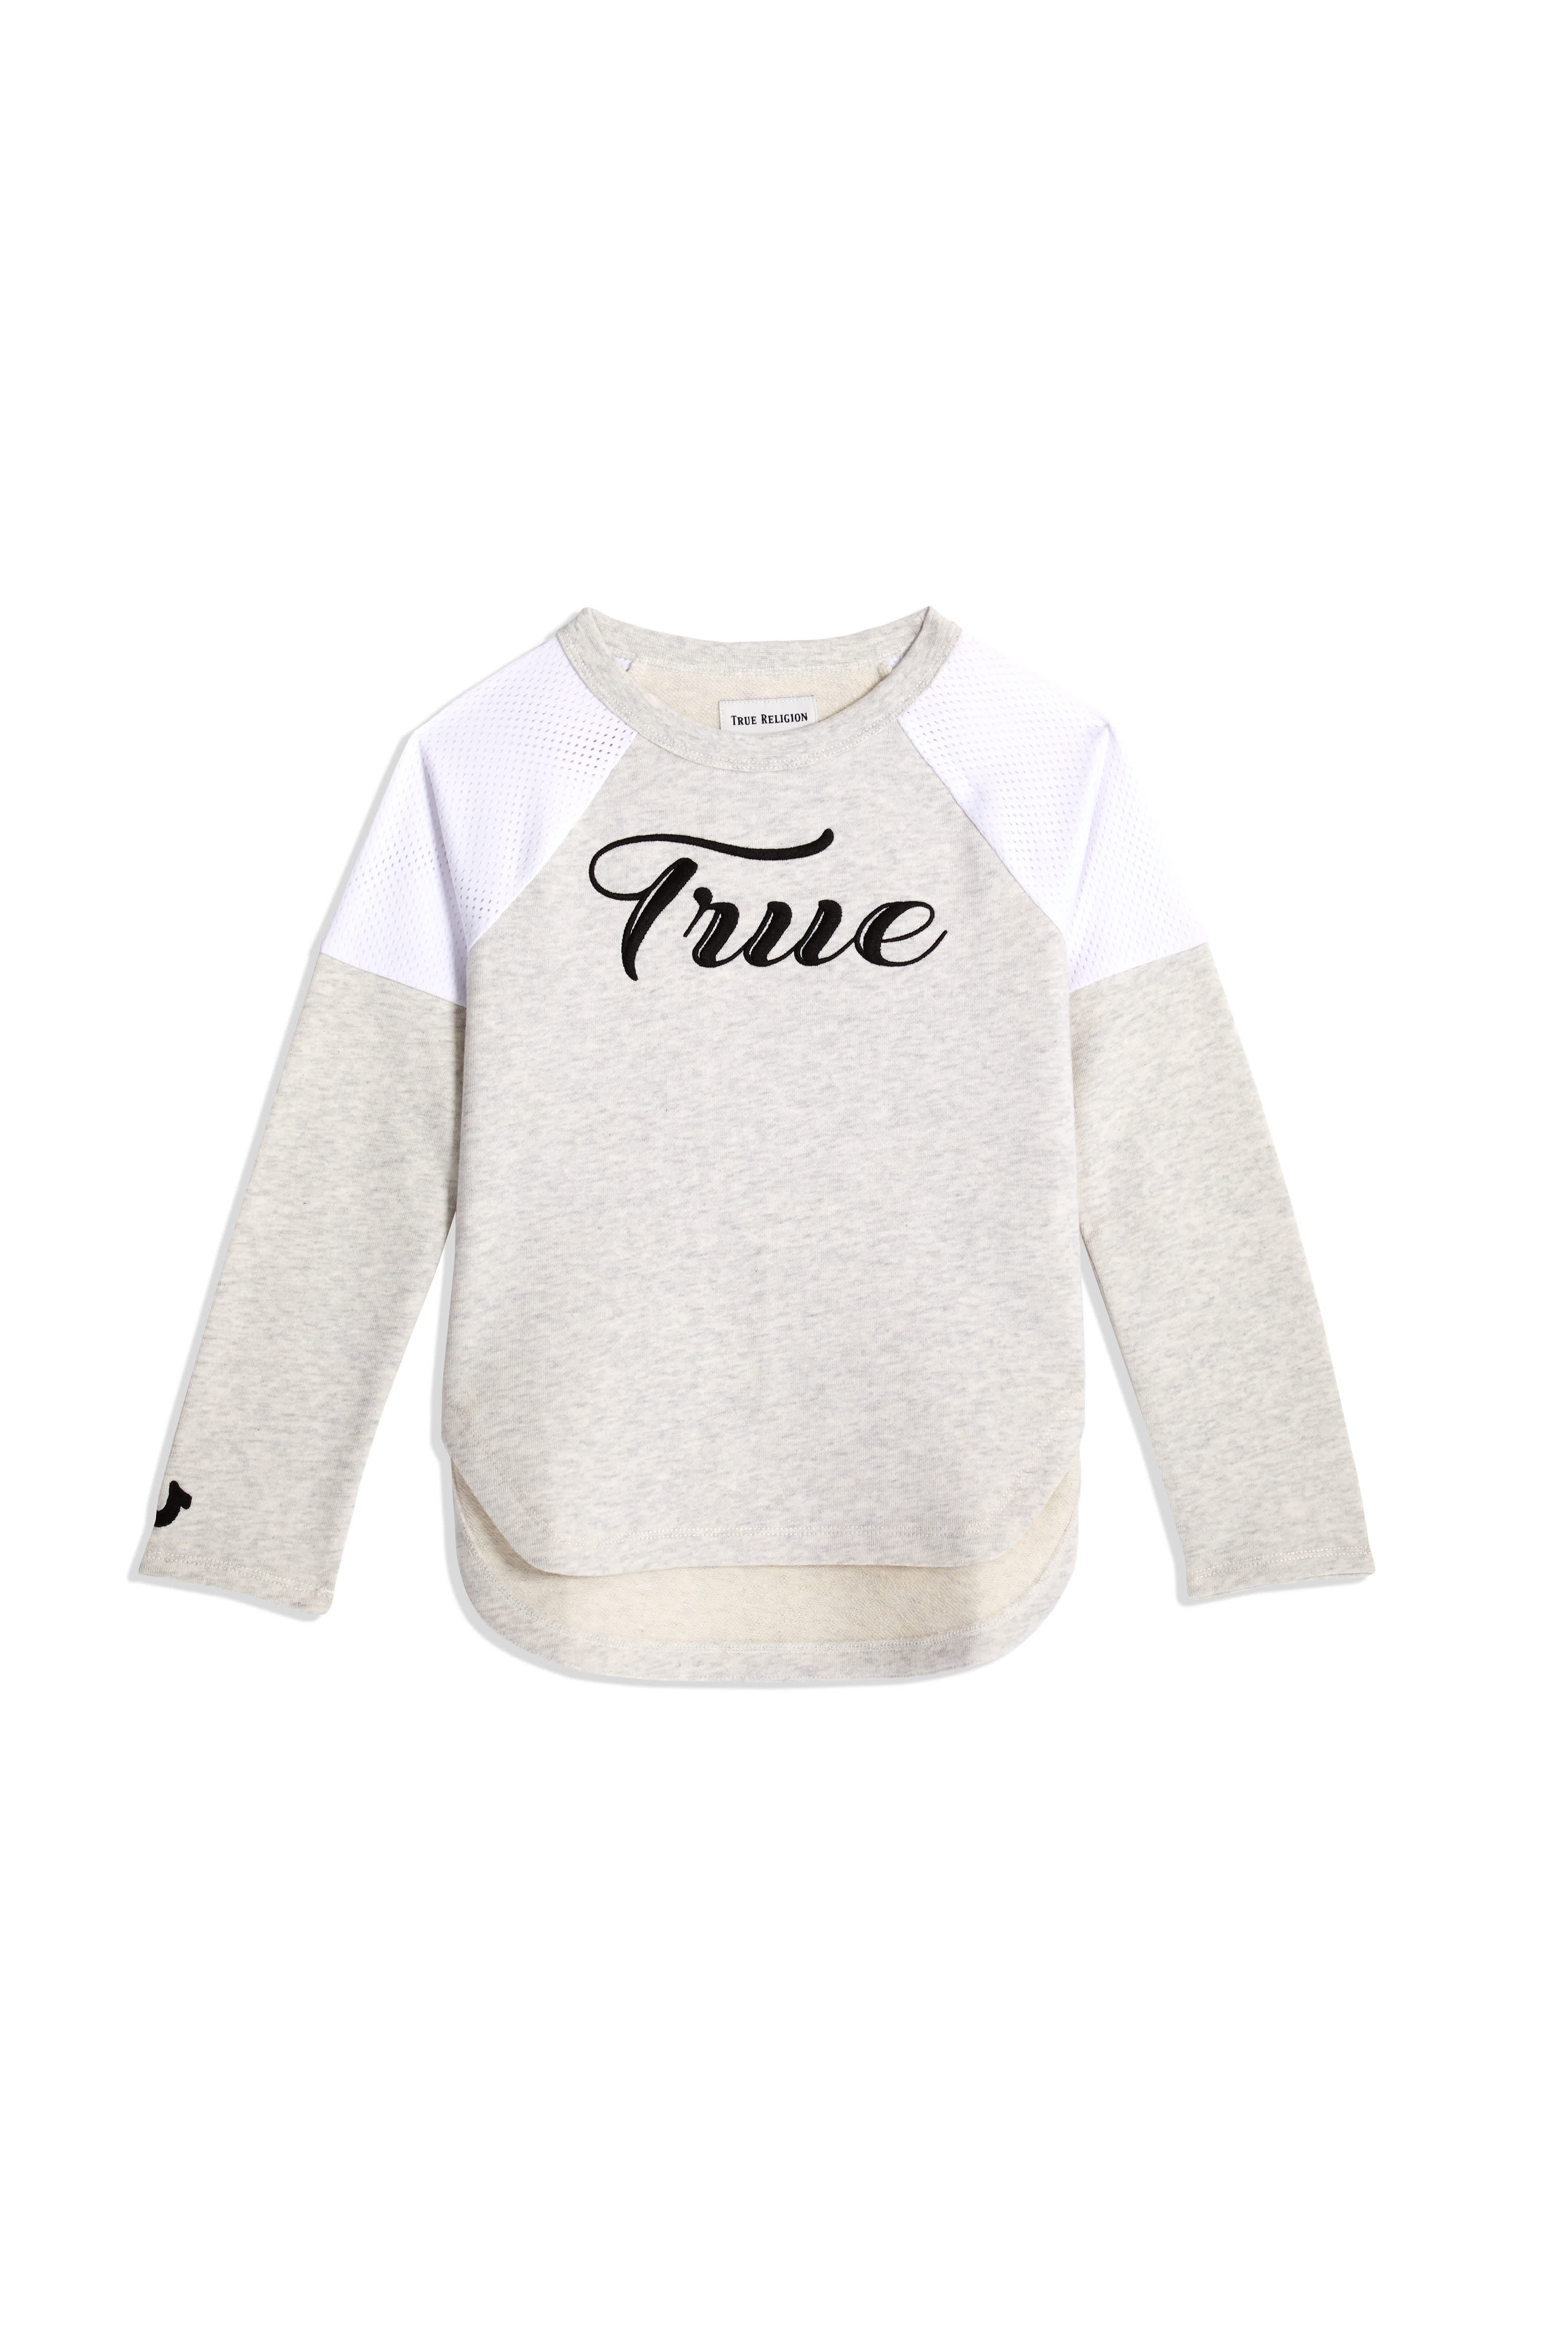 TODDLER/BIG KIDS GIRLS MESH FRENCH TERRY PULLOVER